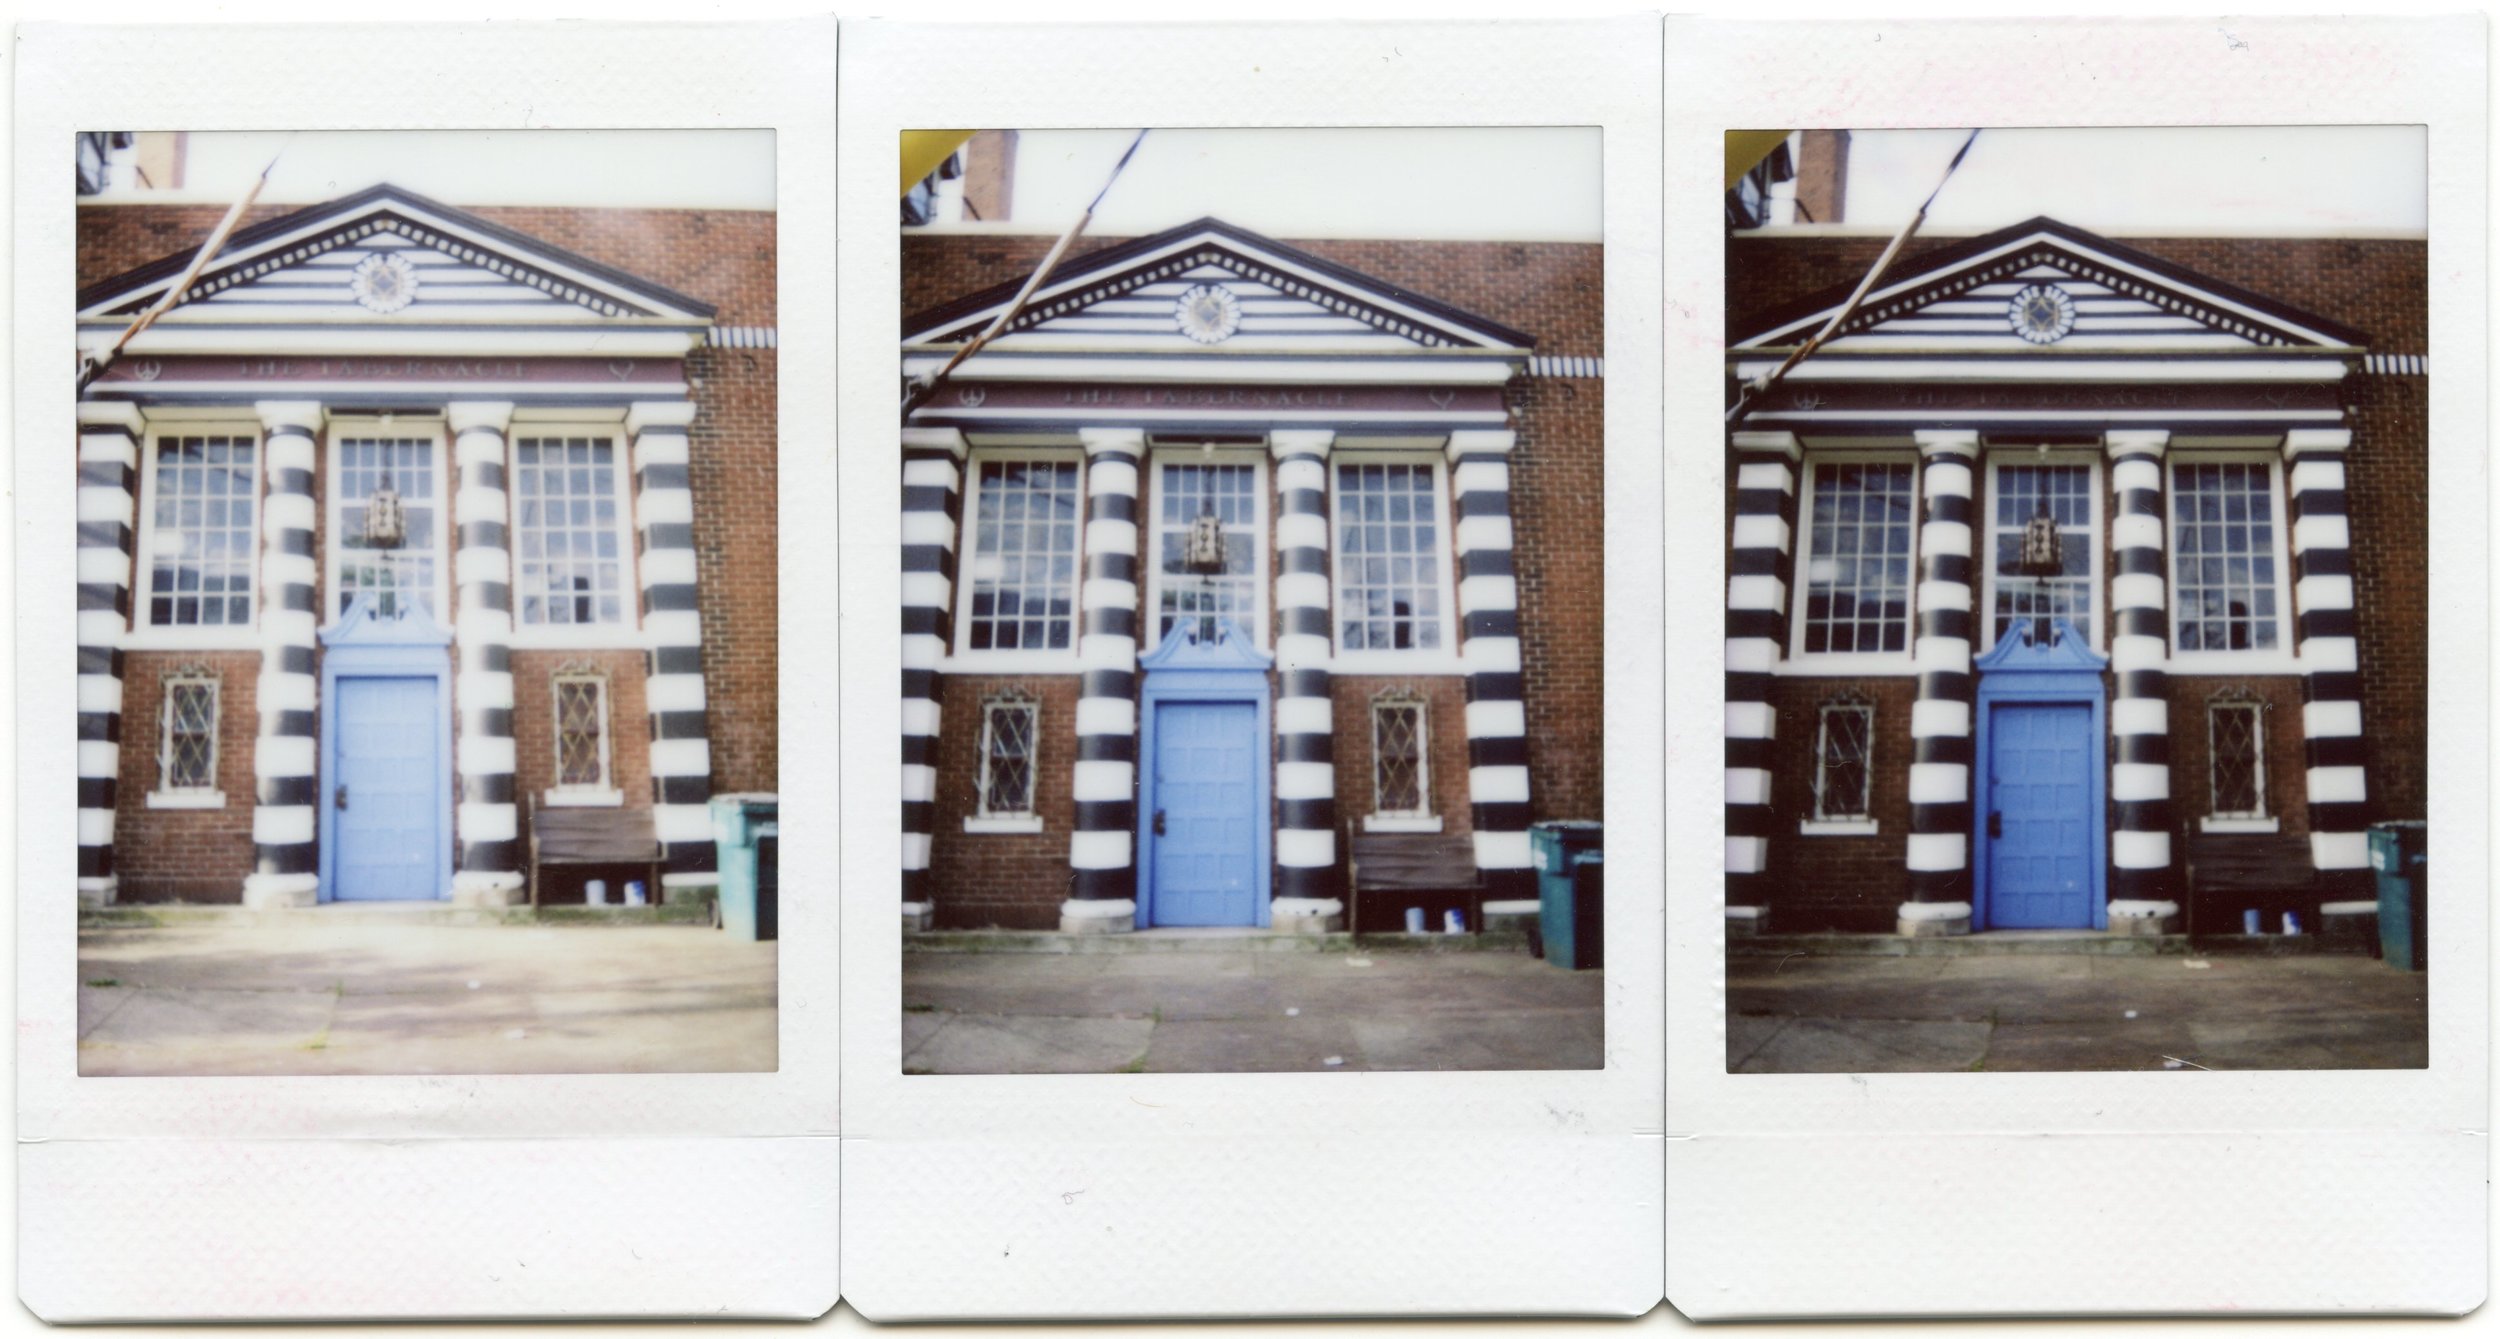 Examples of pictures taken by an Instax 50S morning, slightly overcast at 20 ft. from subject with light exposure, normal exposure and dark exposure.